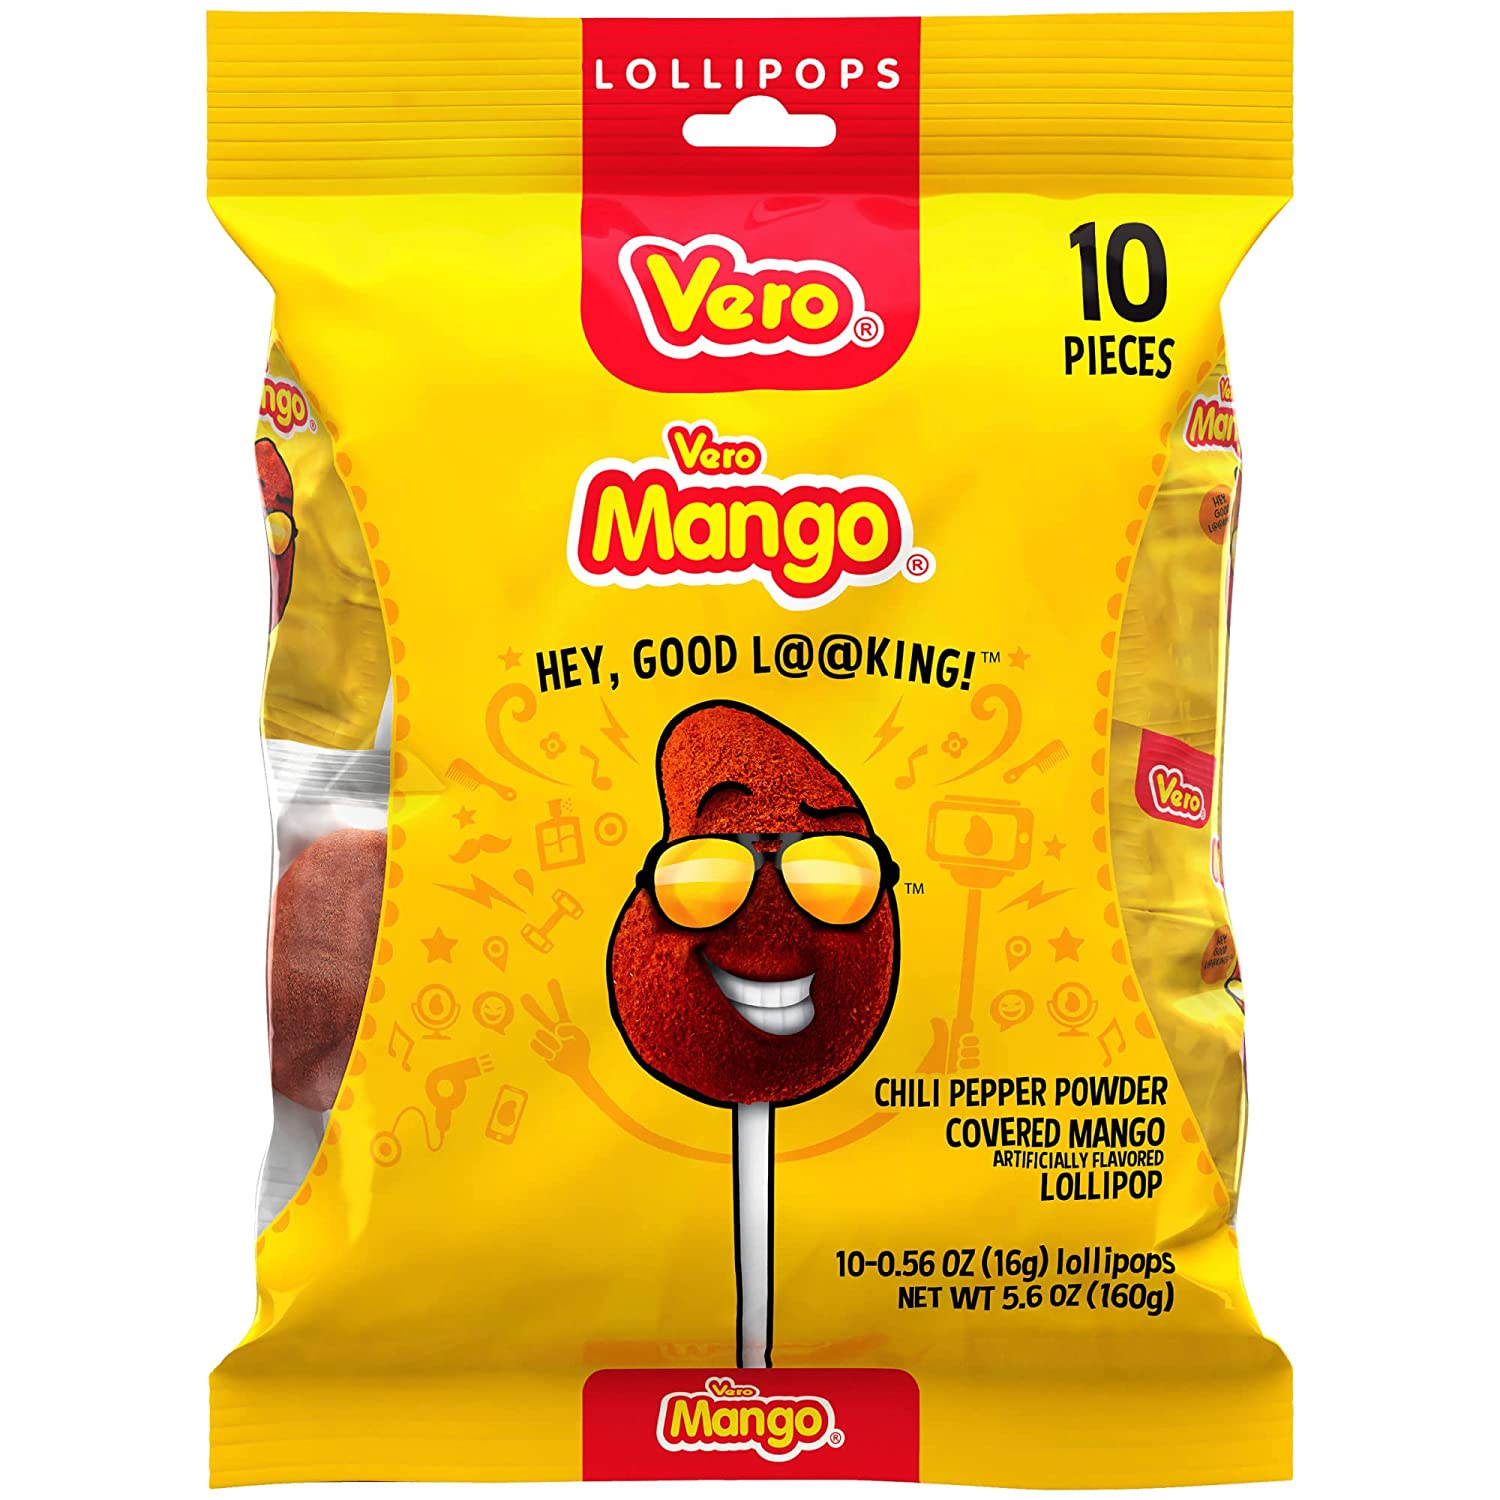 10-Count 5.6-Ounces Vero Mango Lollipops Coated with Chili Powder $1.74 + Free Shipping w/ Prime or orders $25+